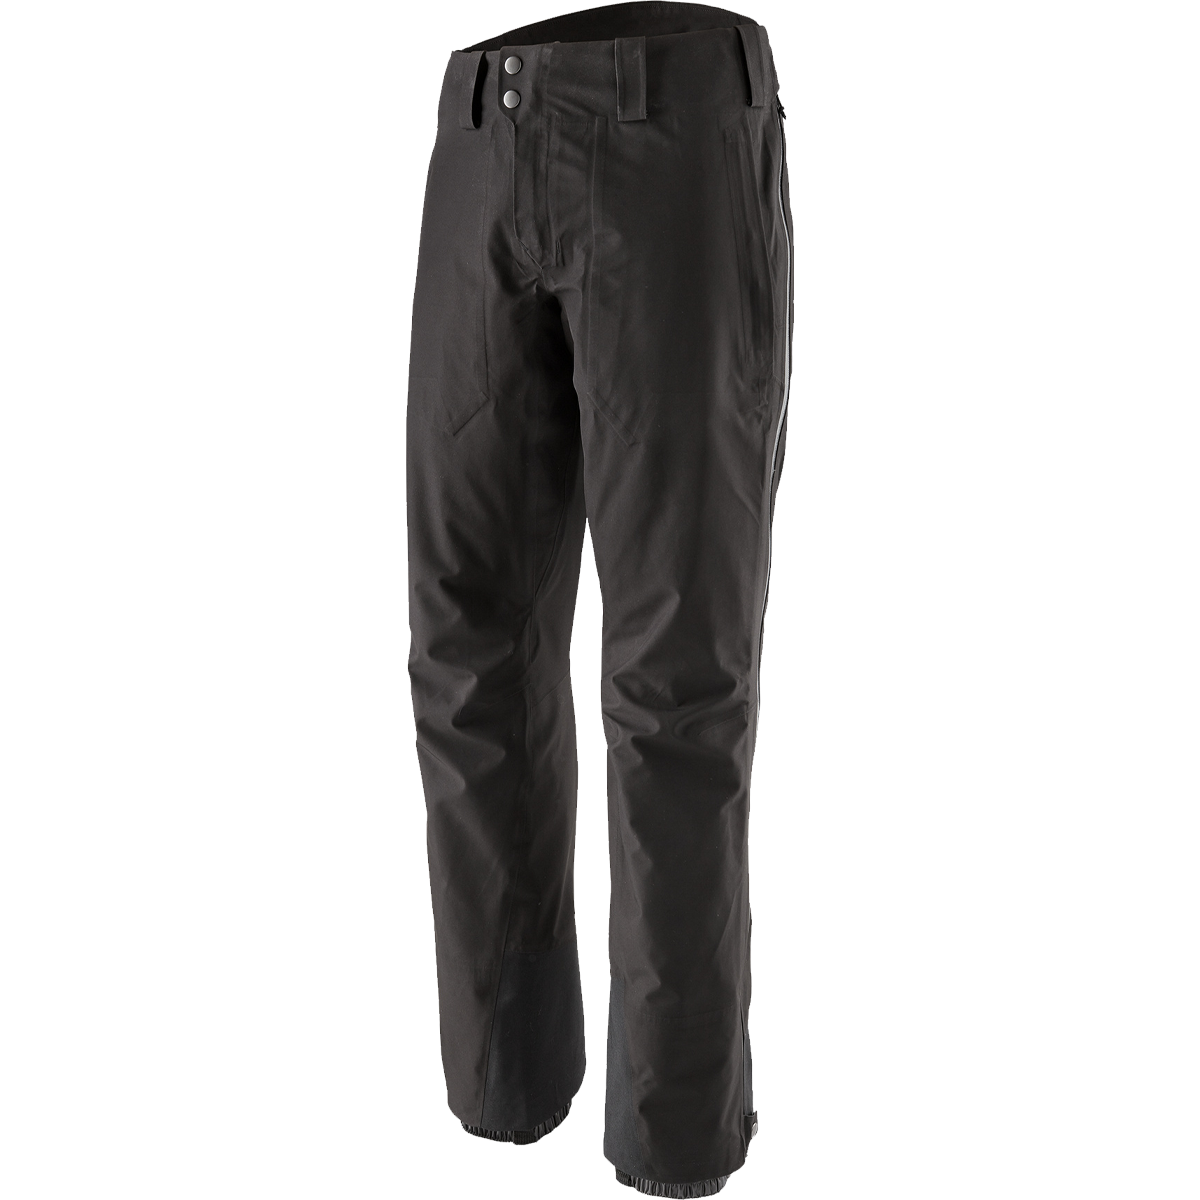 Patagonia Triolet Pant - Wonderful Recycled Gore-Tex Pants - Engearment